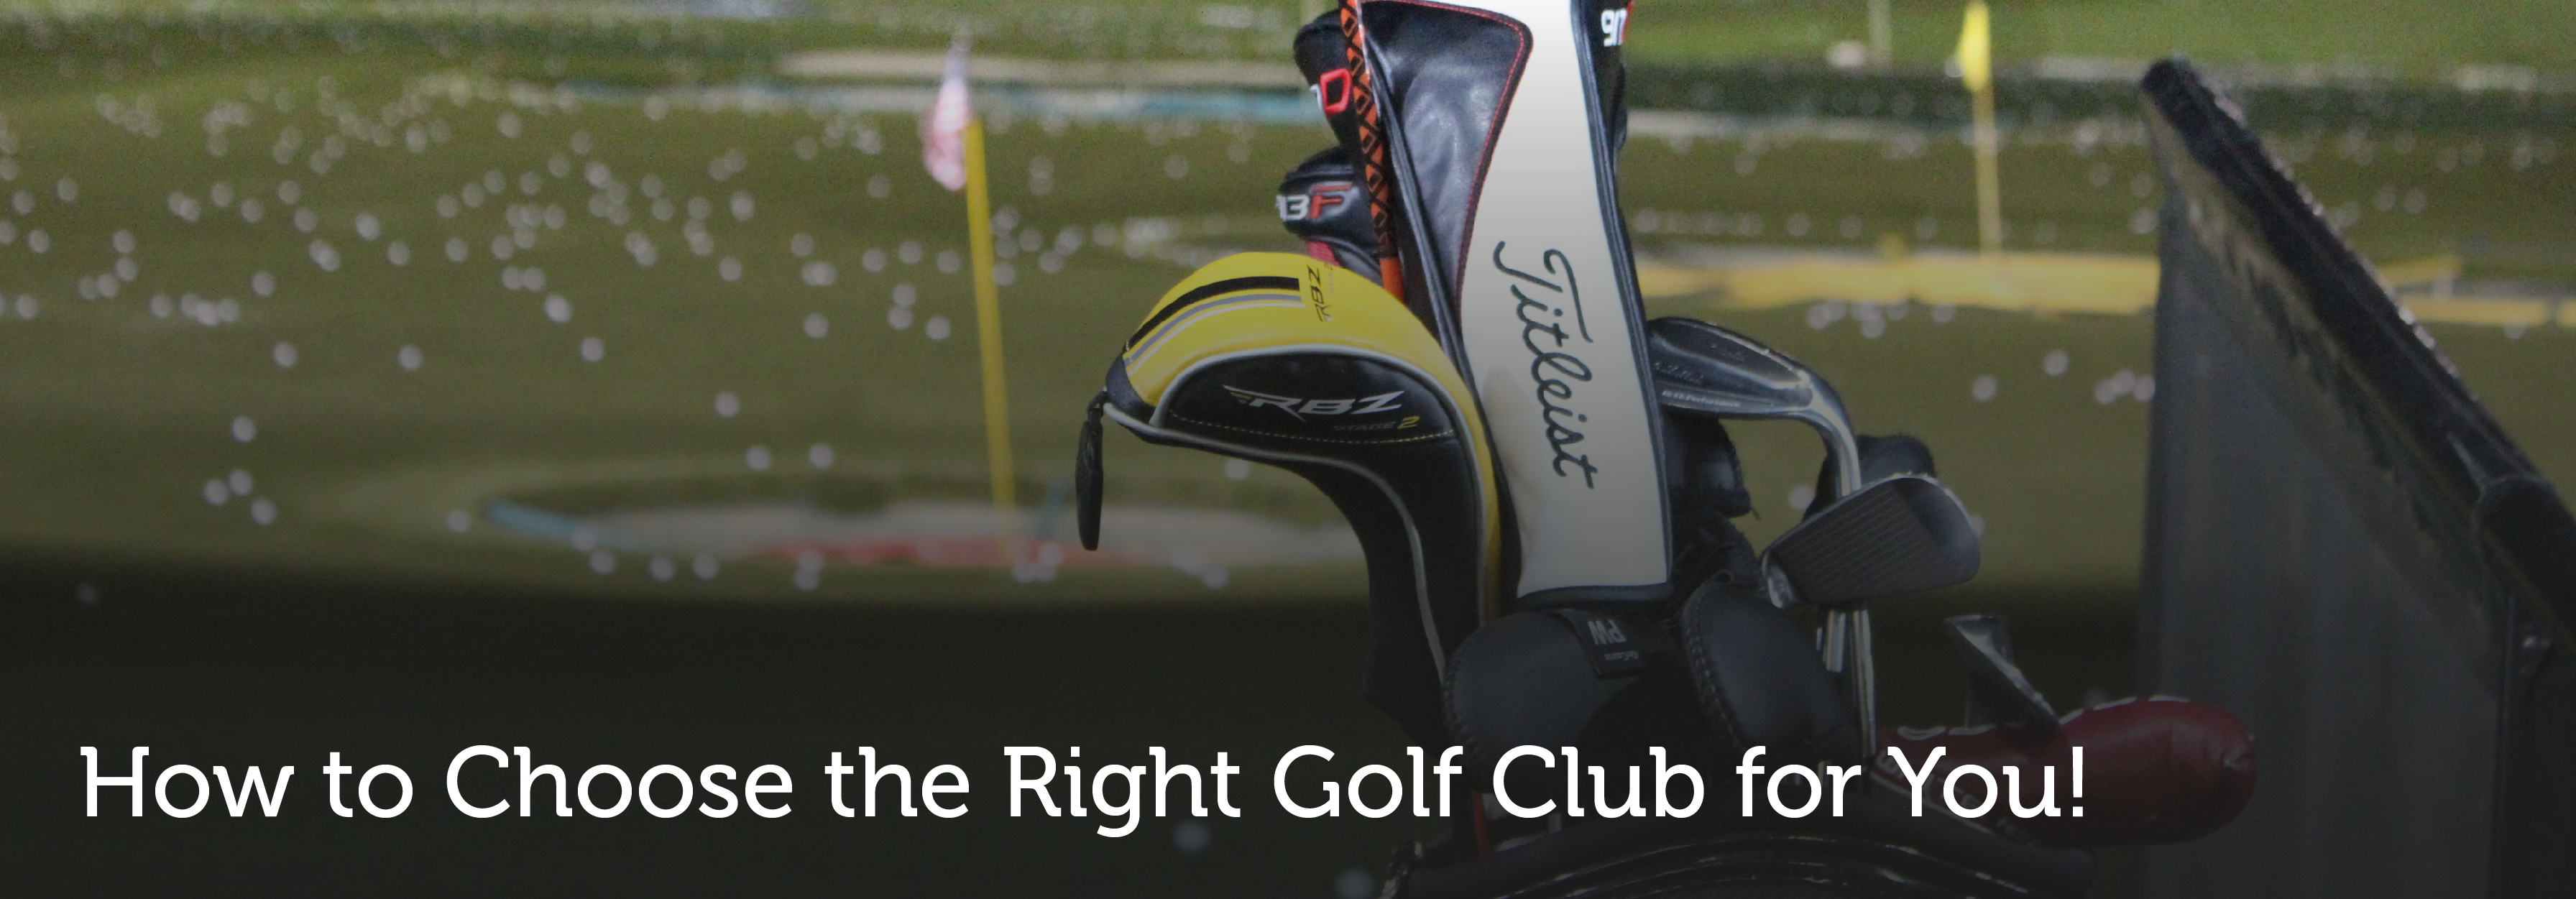 Offset In Golf Clubs: What It Is and Why It's There